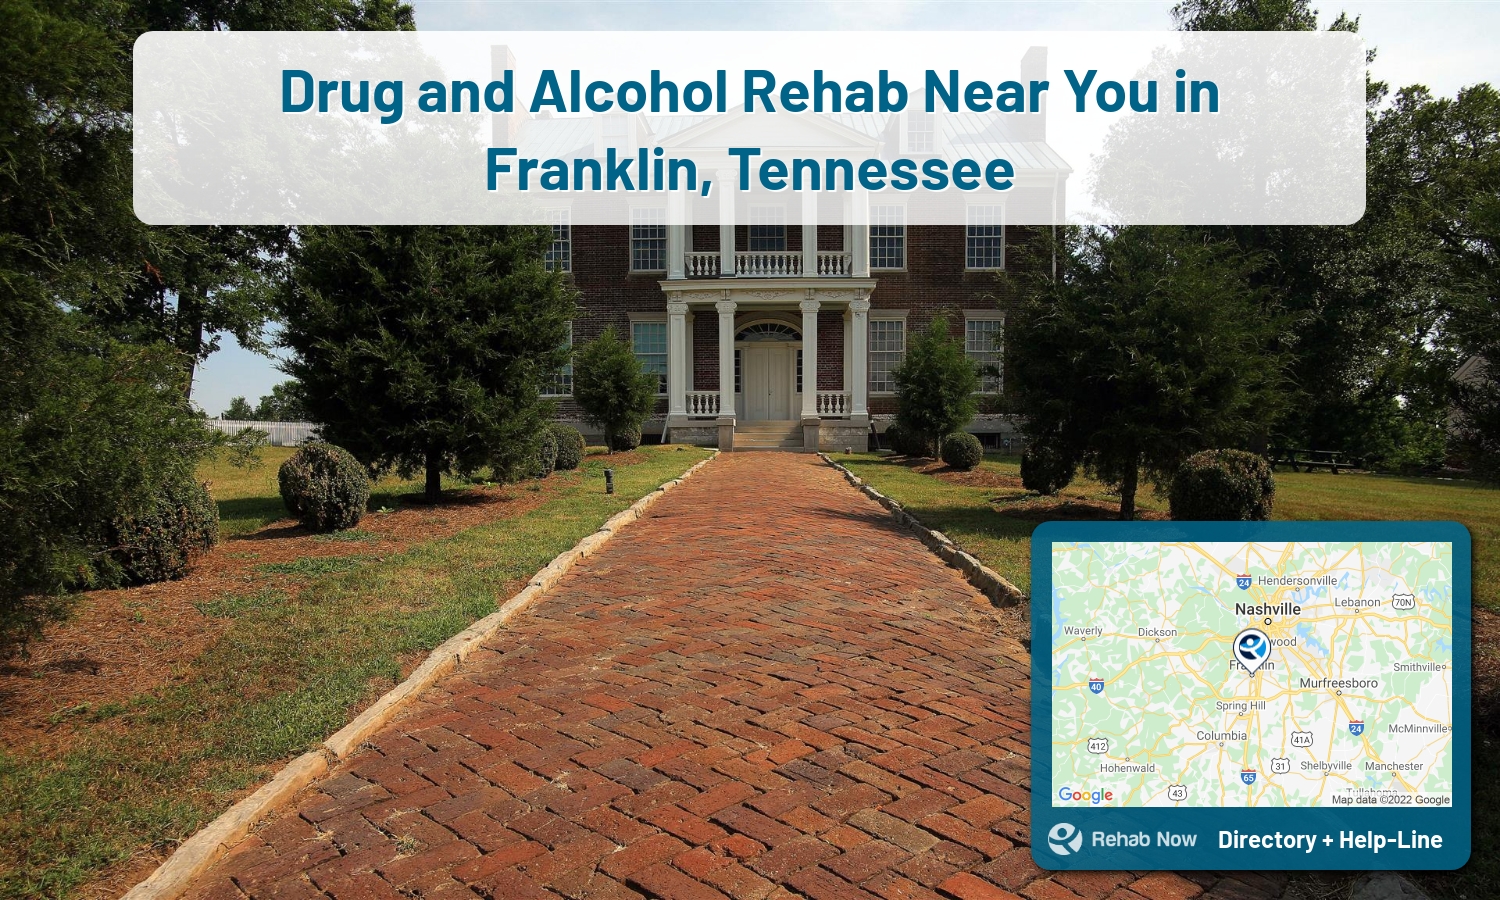 Franklin, TN Treatment Centers. Find drug rehab in Franklin, Tennessee, or detox and treatment programs. Get the right help now!